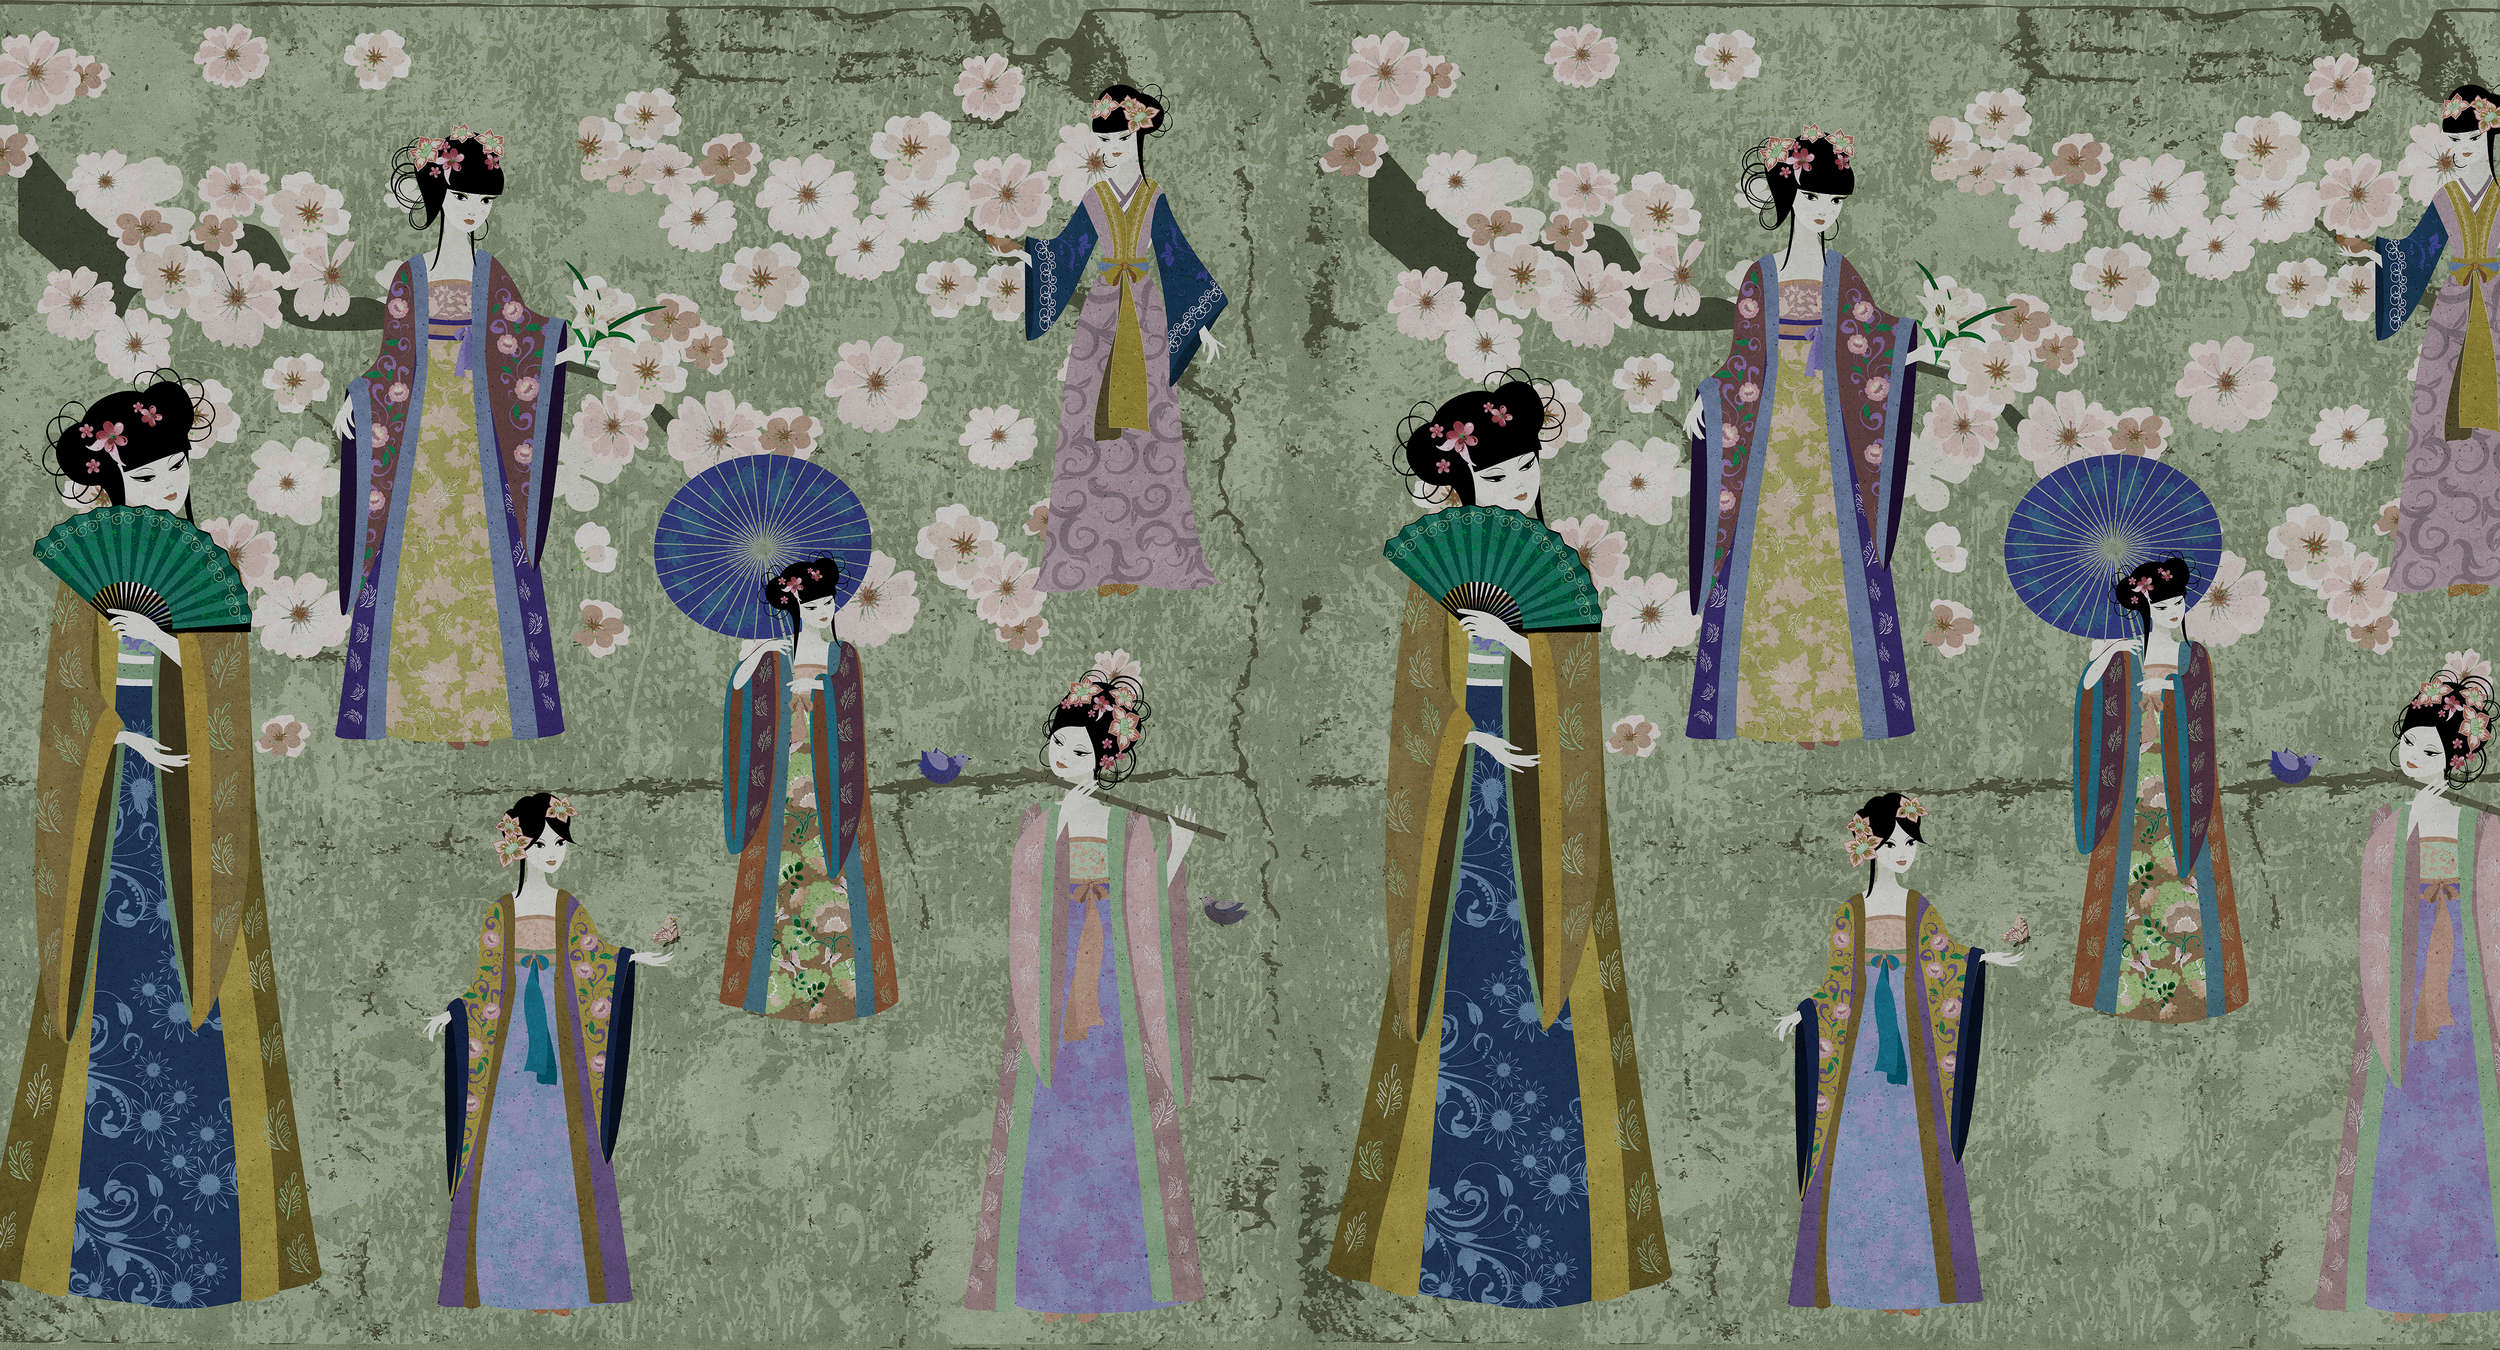             mural Japan comic with cherry blossoms - green, blue
        